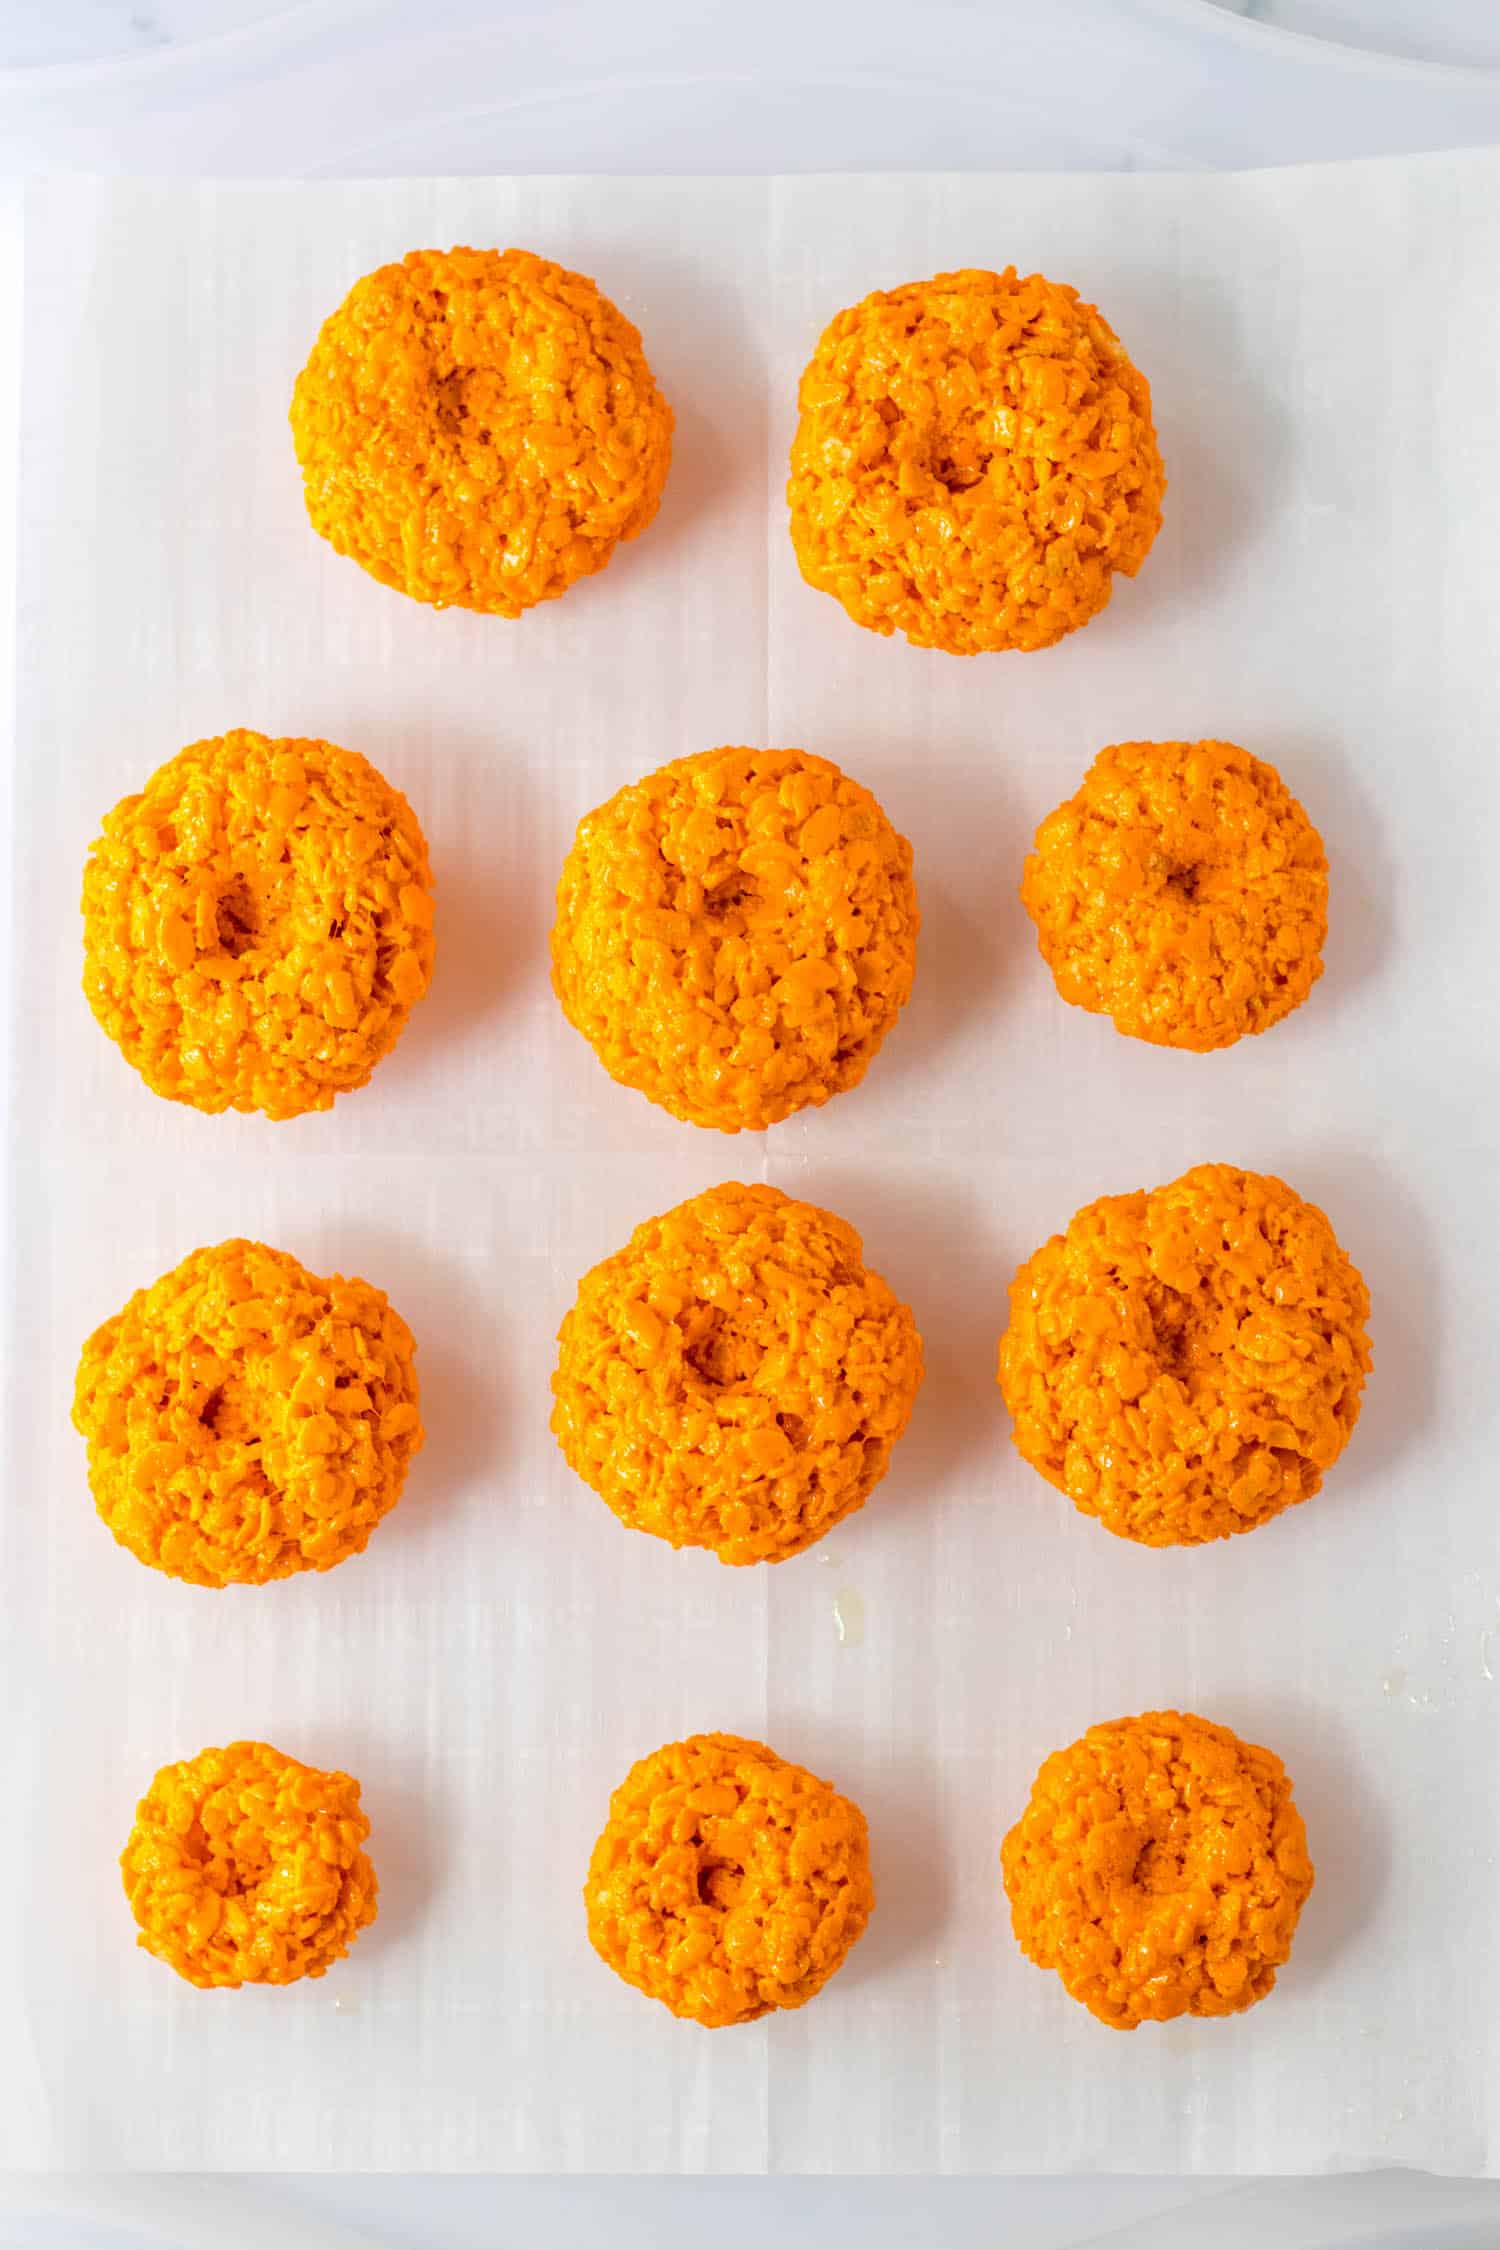 Spray hands with cooking spray and grab chunks of rice krispies and form into balls. Press down on the top and bottom to make it look like a pumpkin.